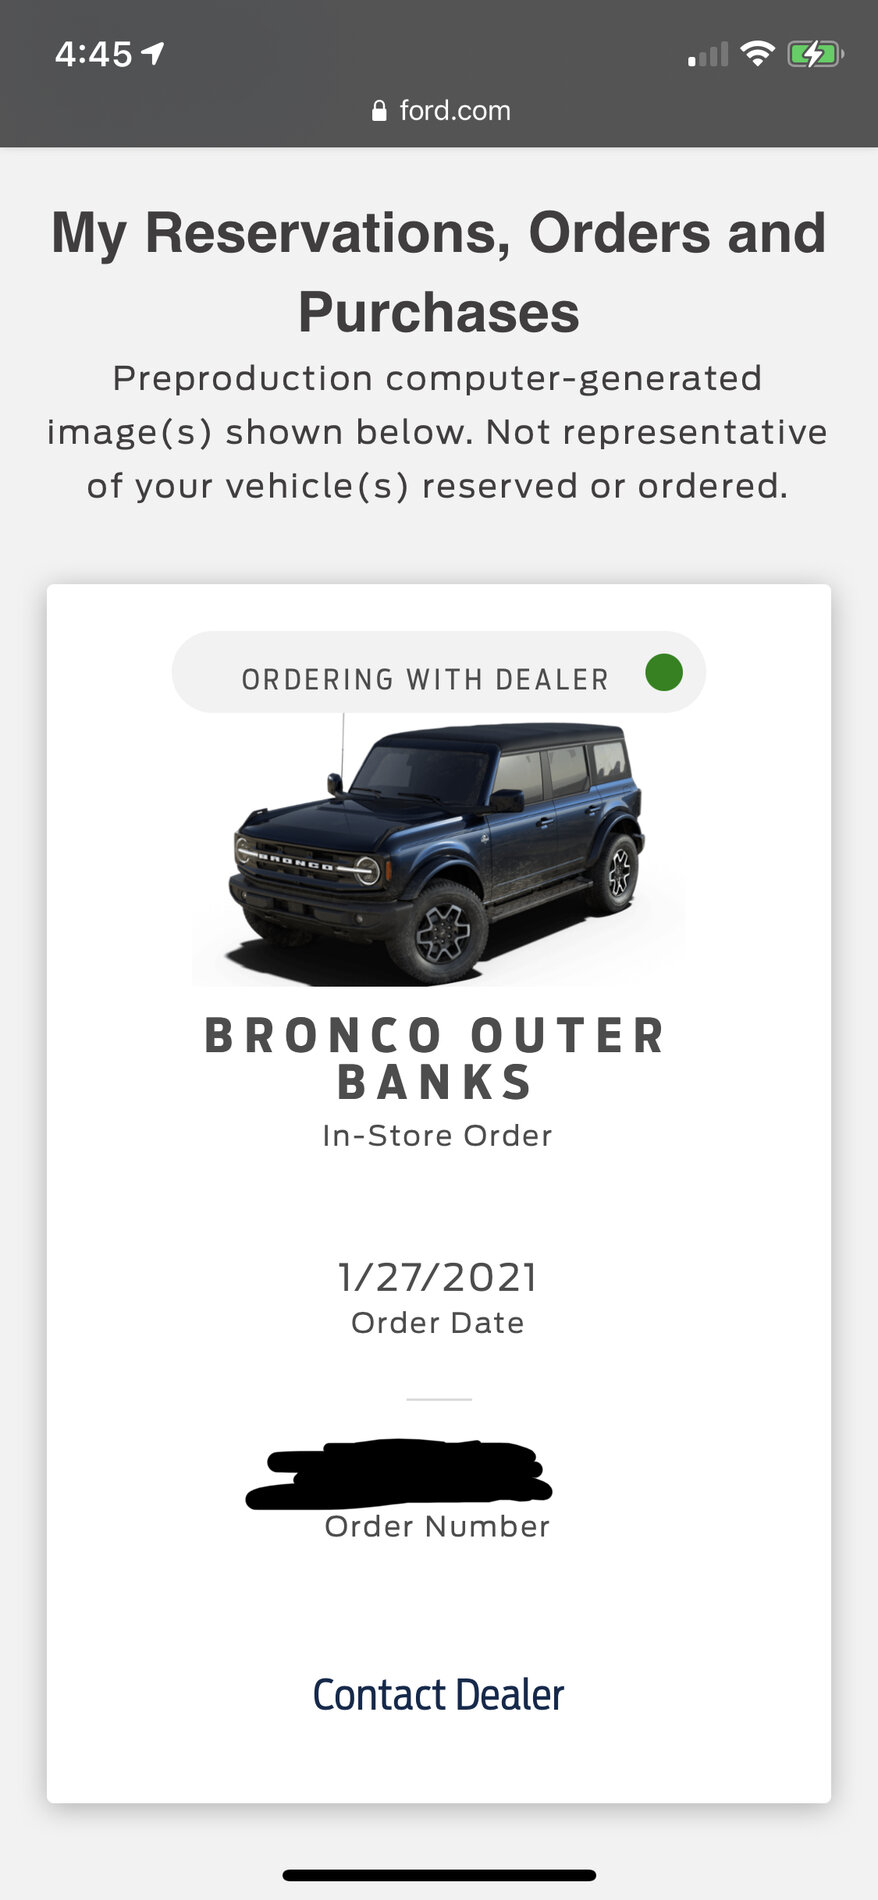 Ford Bronco New Green Dot + "Ordering With Dealer") showing on Ford.com My Reservations Page 1627995956880